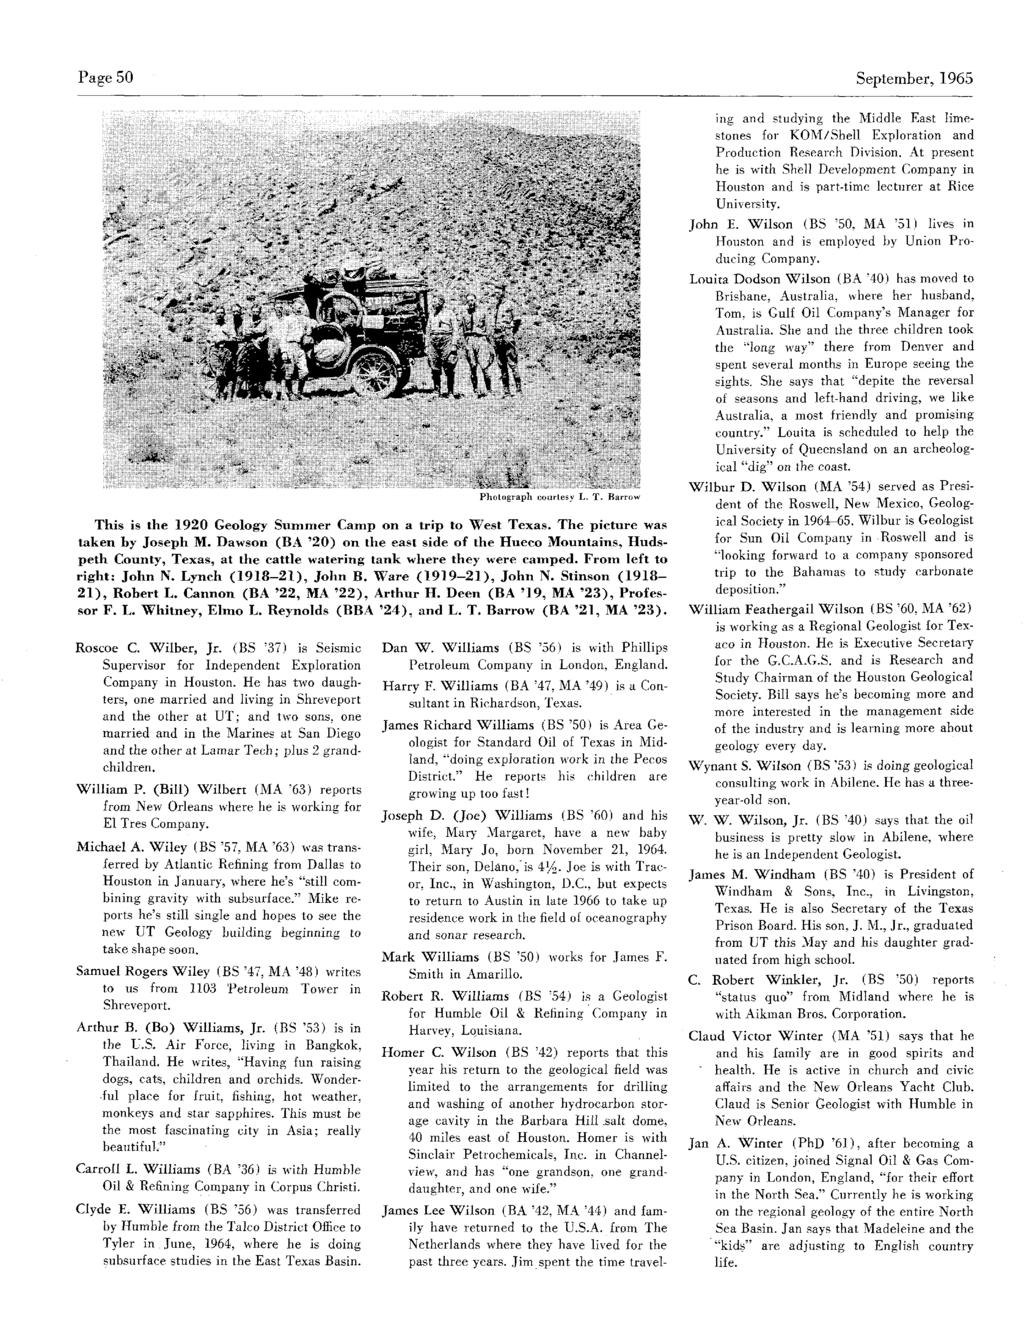 Page 50 September,1965 Photograph courtesyl T Barrow This is the 1920 Geology Summer Camp on a trip to West Texas. The picture was taken by Joseph M.